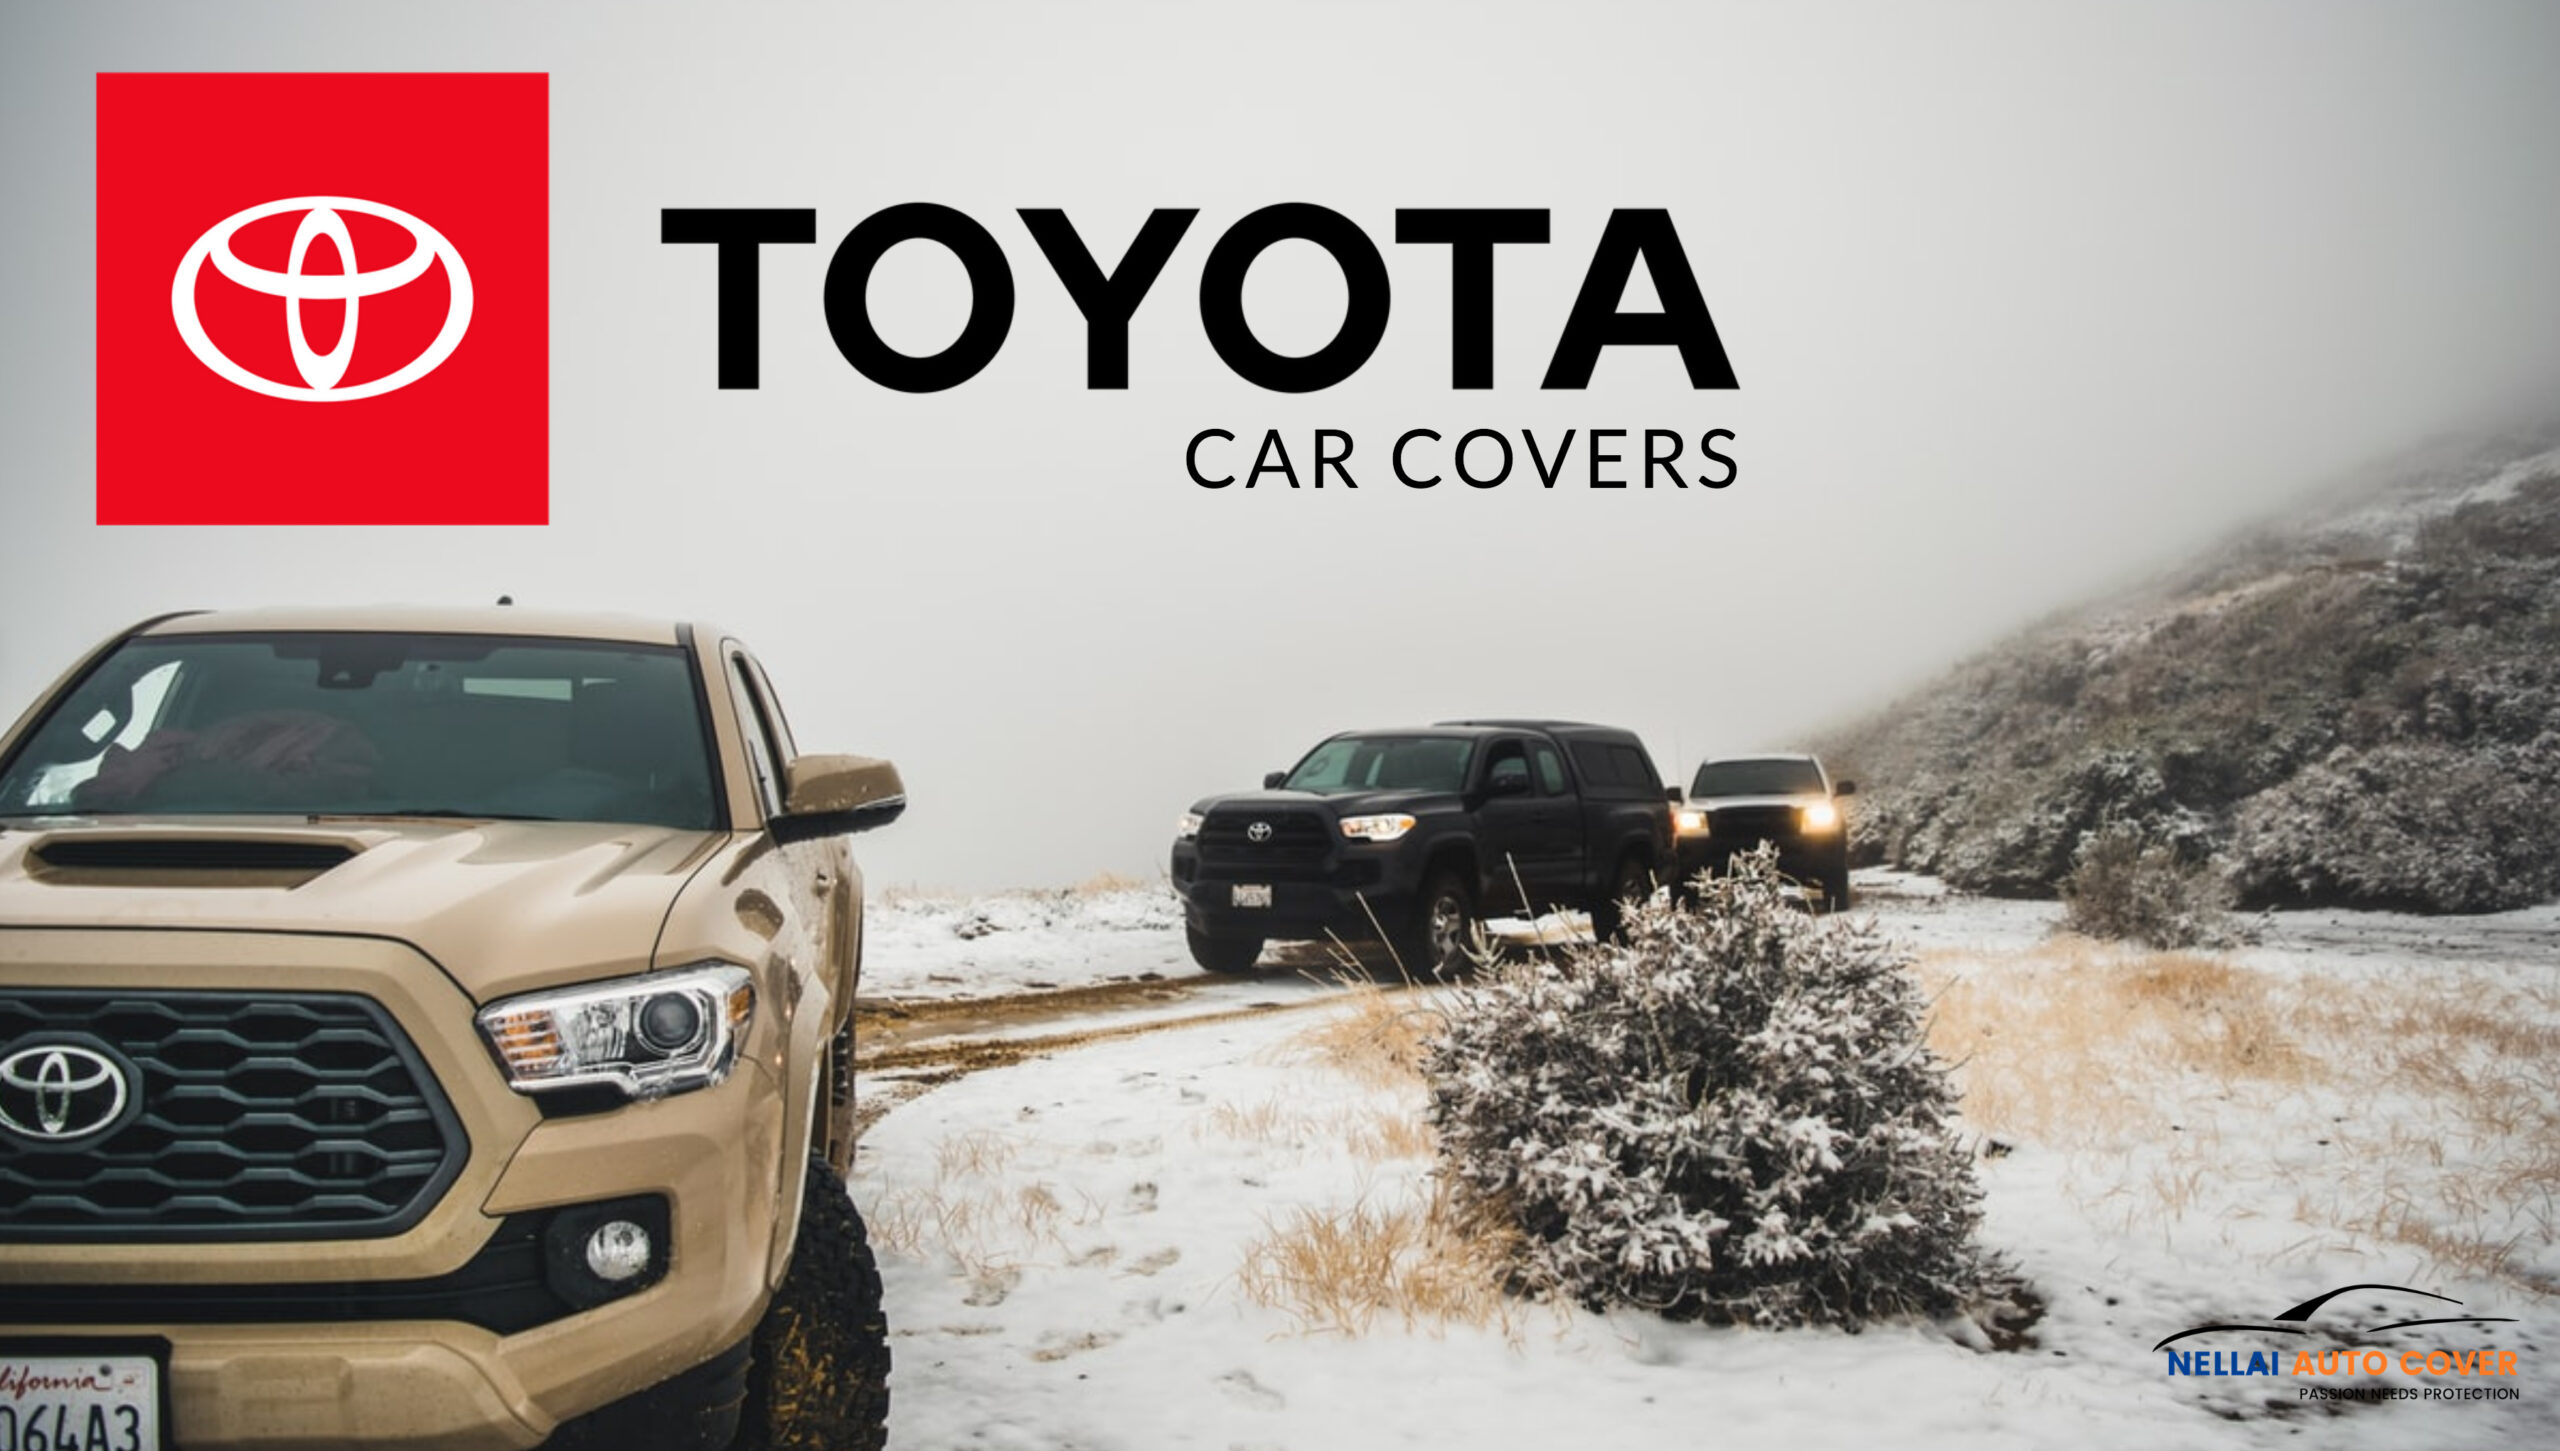 Toyota Car Covers